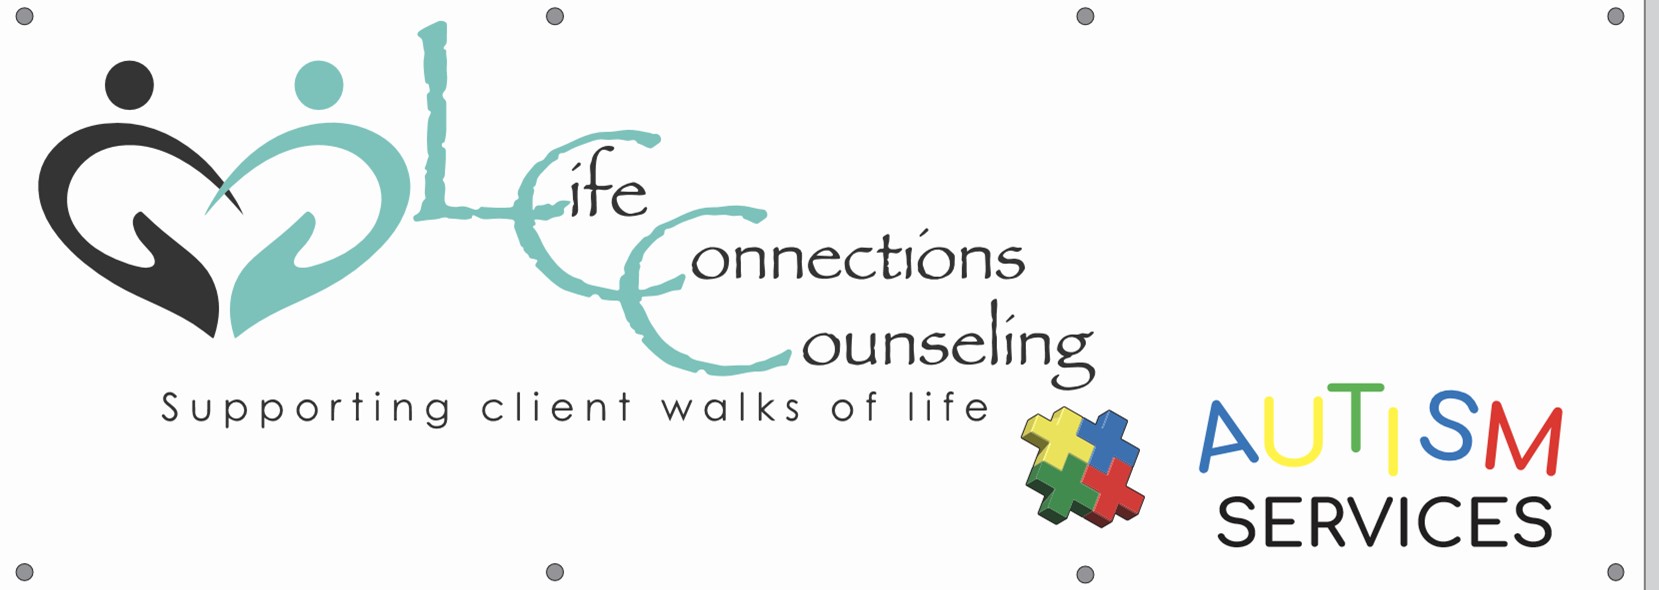 Life Connections Counseling Services ™